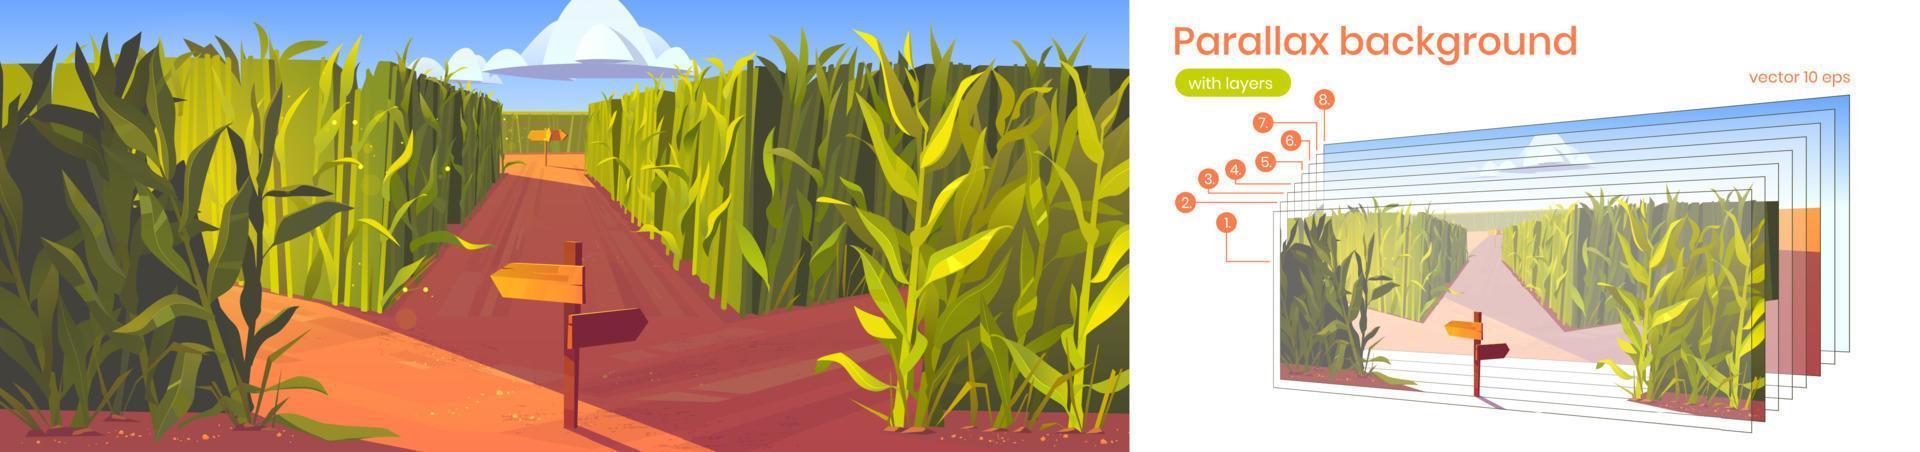 Parallax background cornfield with road pointers vector